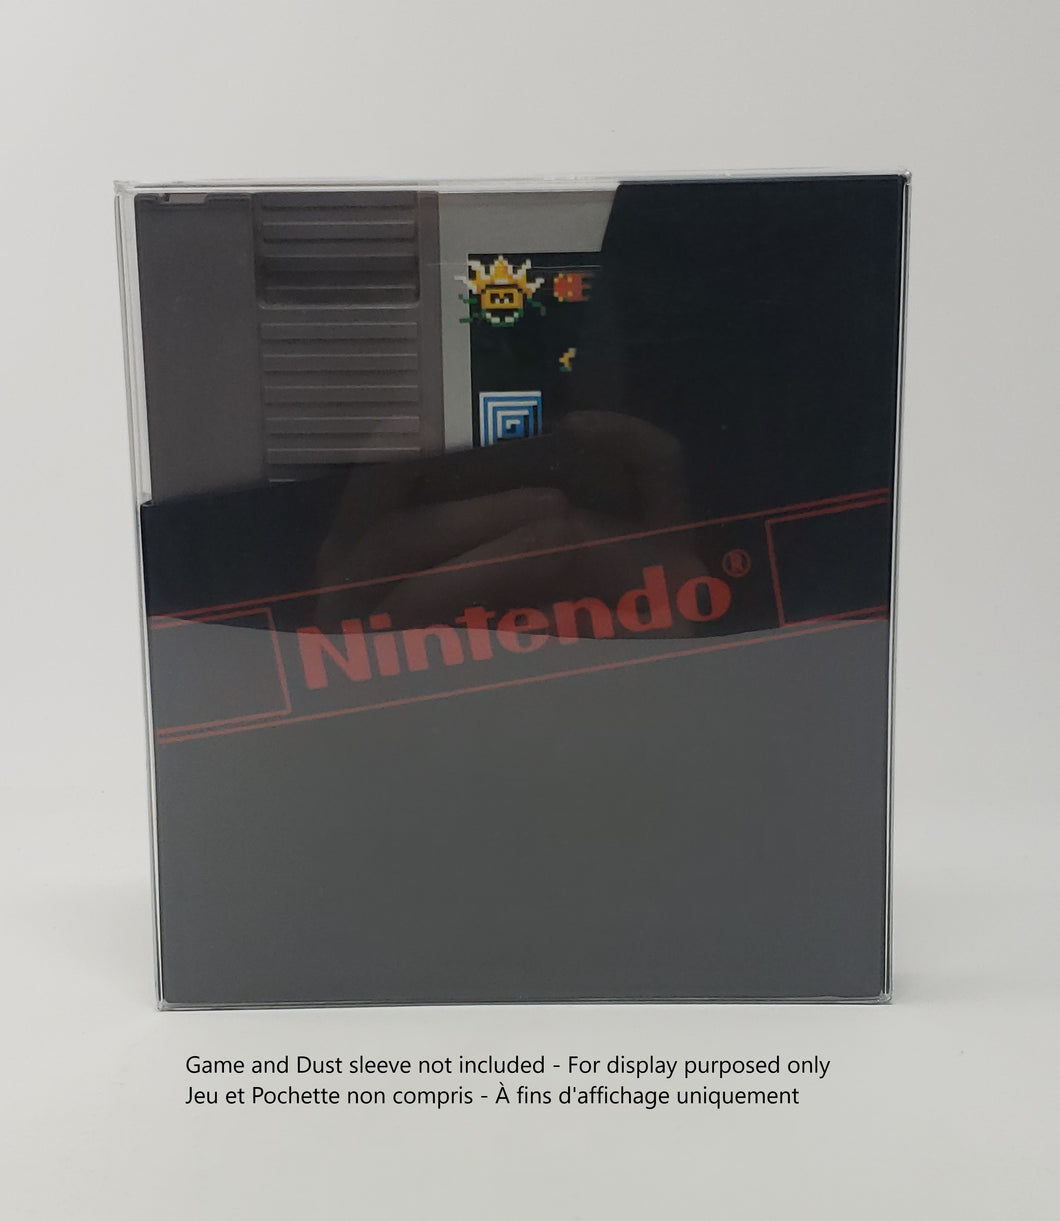 BOX PROTECTOR FOR NINTENDO NES DUST SLEEVE CARTRIDGE GAME CLEAR PLASTIC CASE